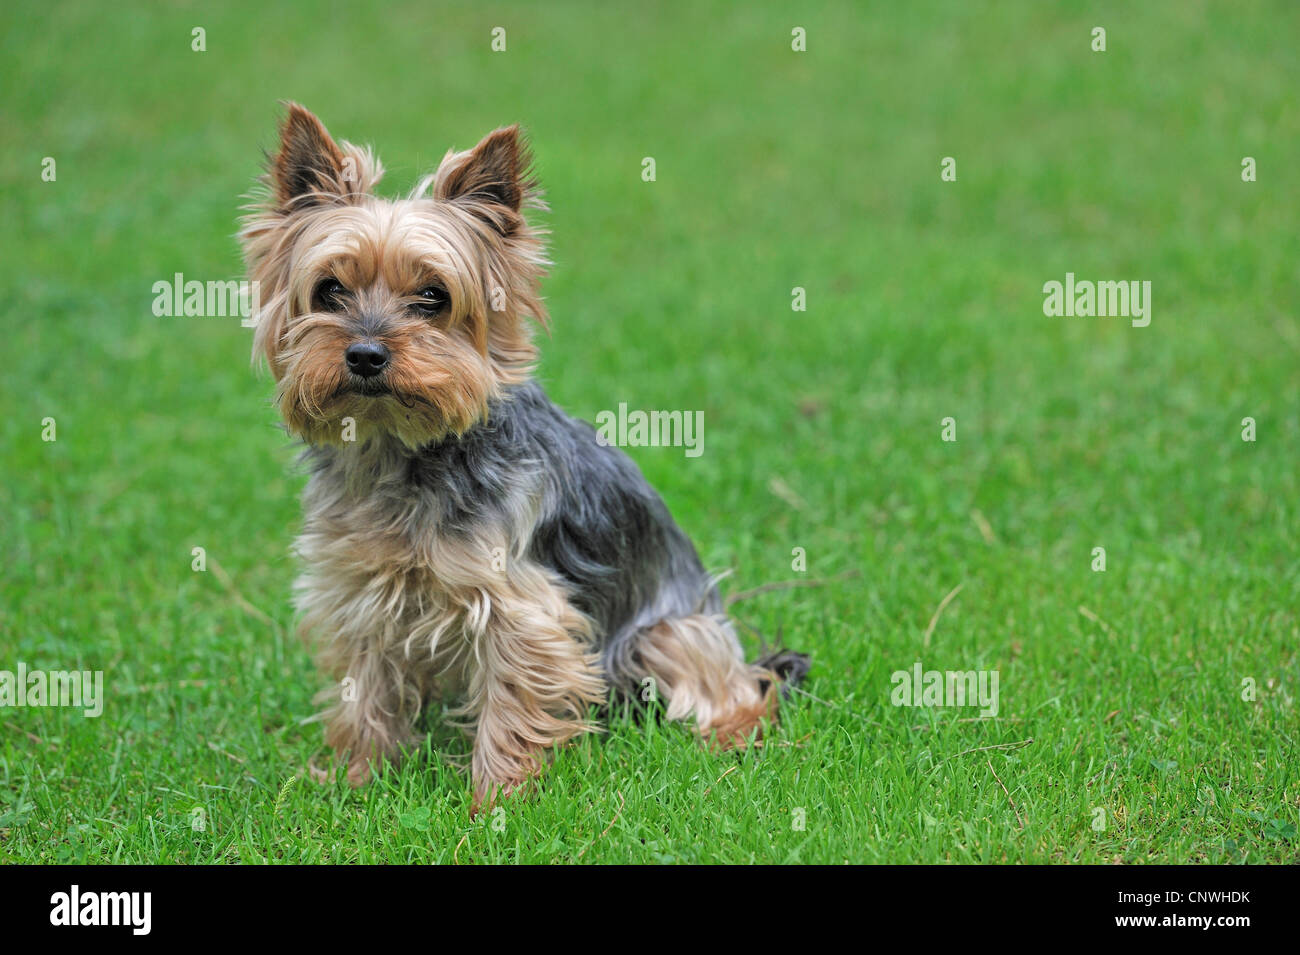 Yorkshire Terrier (Canis lupus f. familiaris), sitting in a meadow Stock Photo